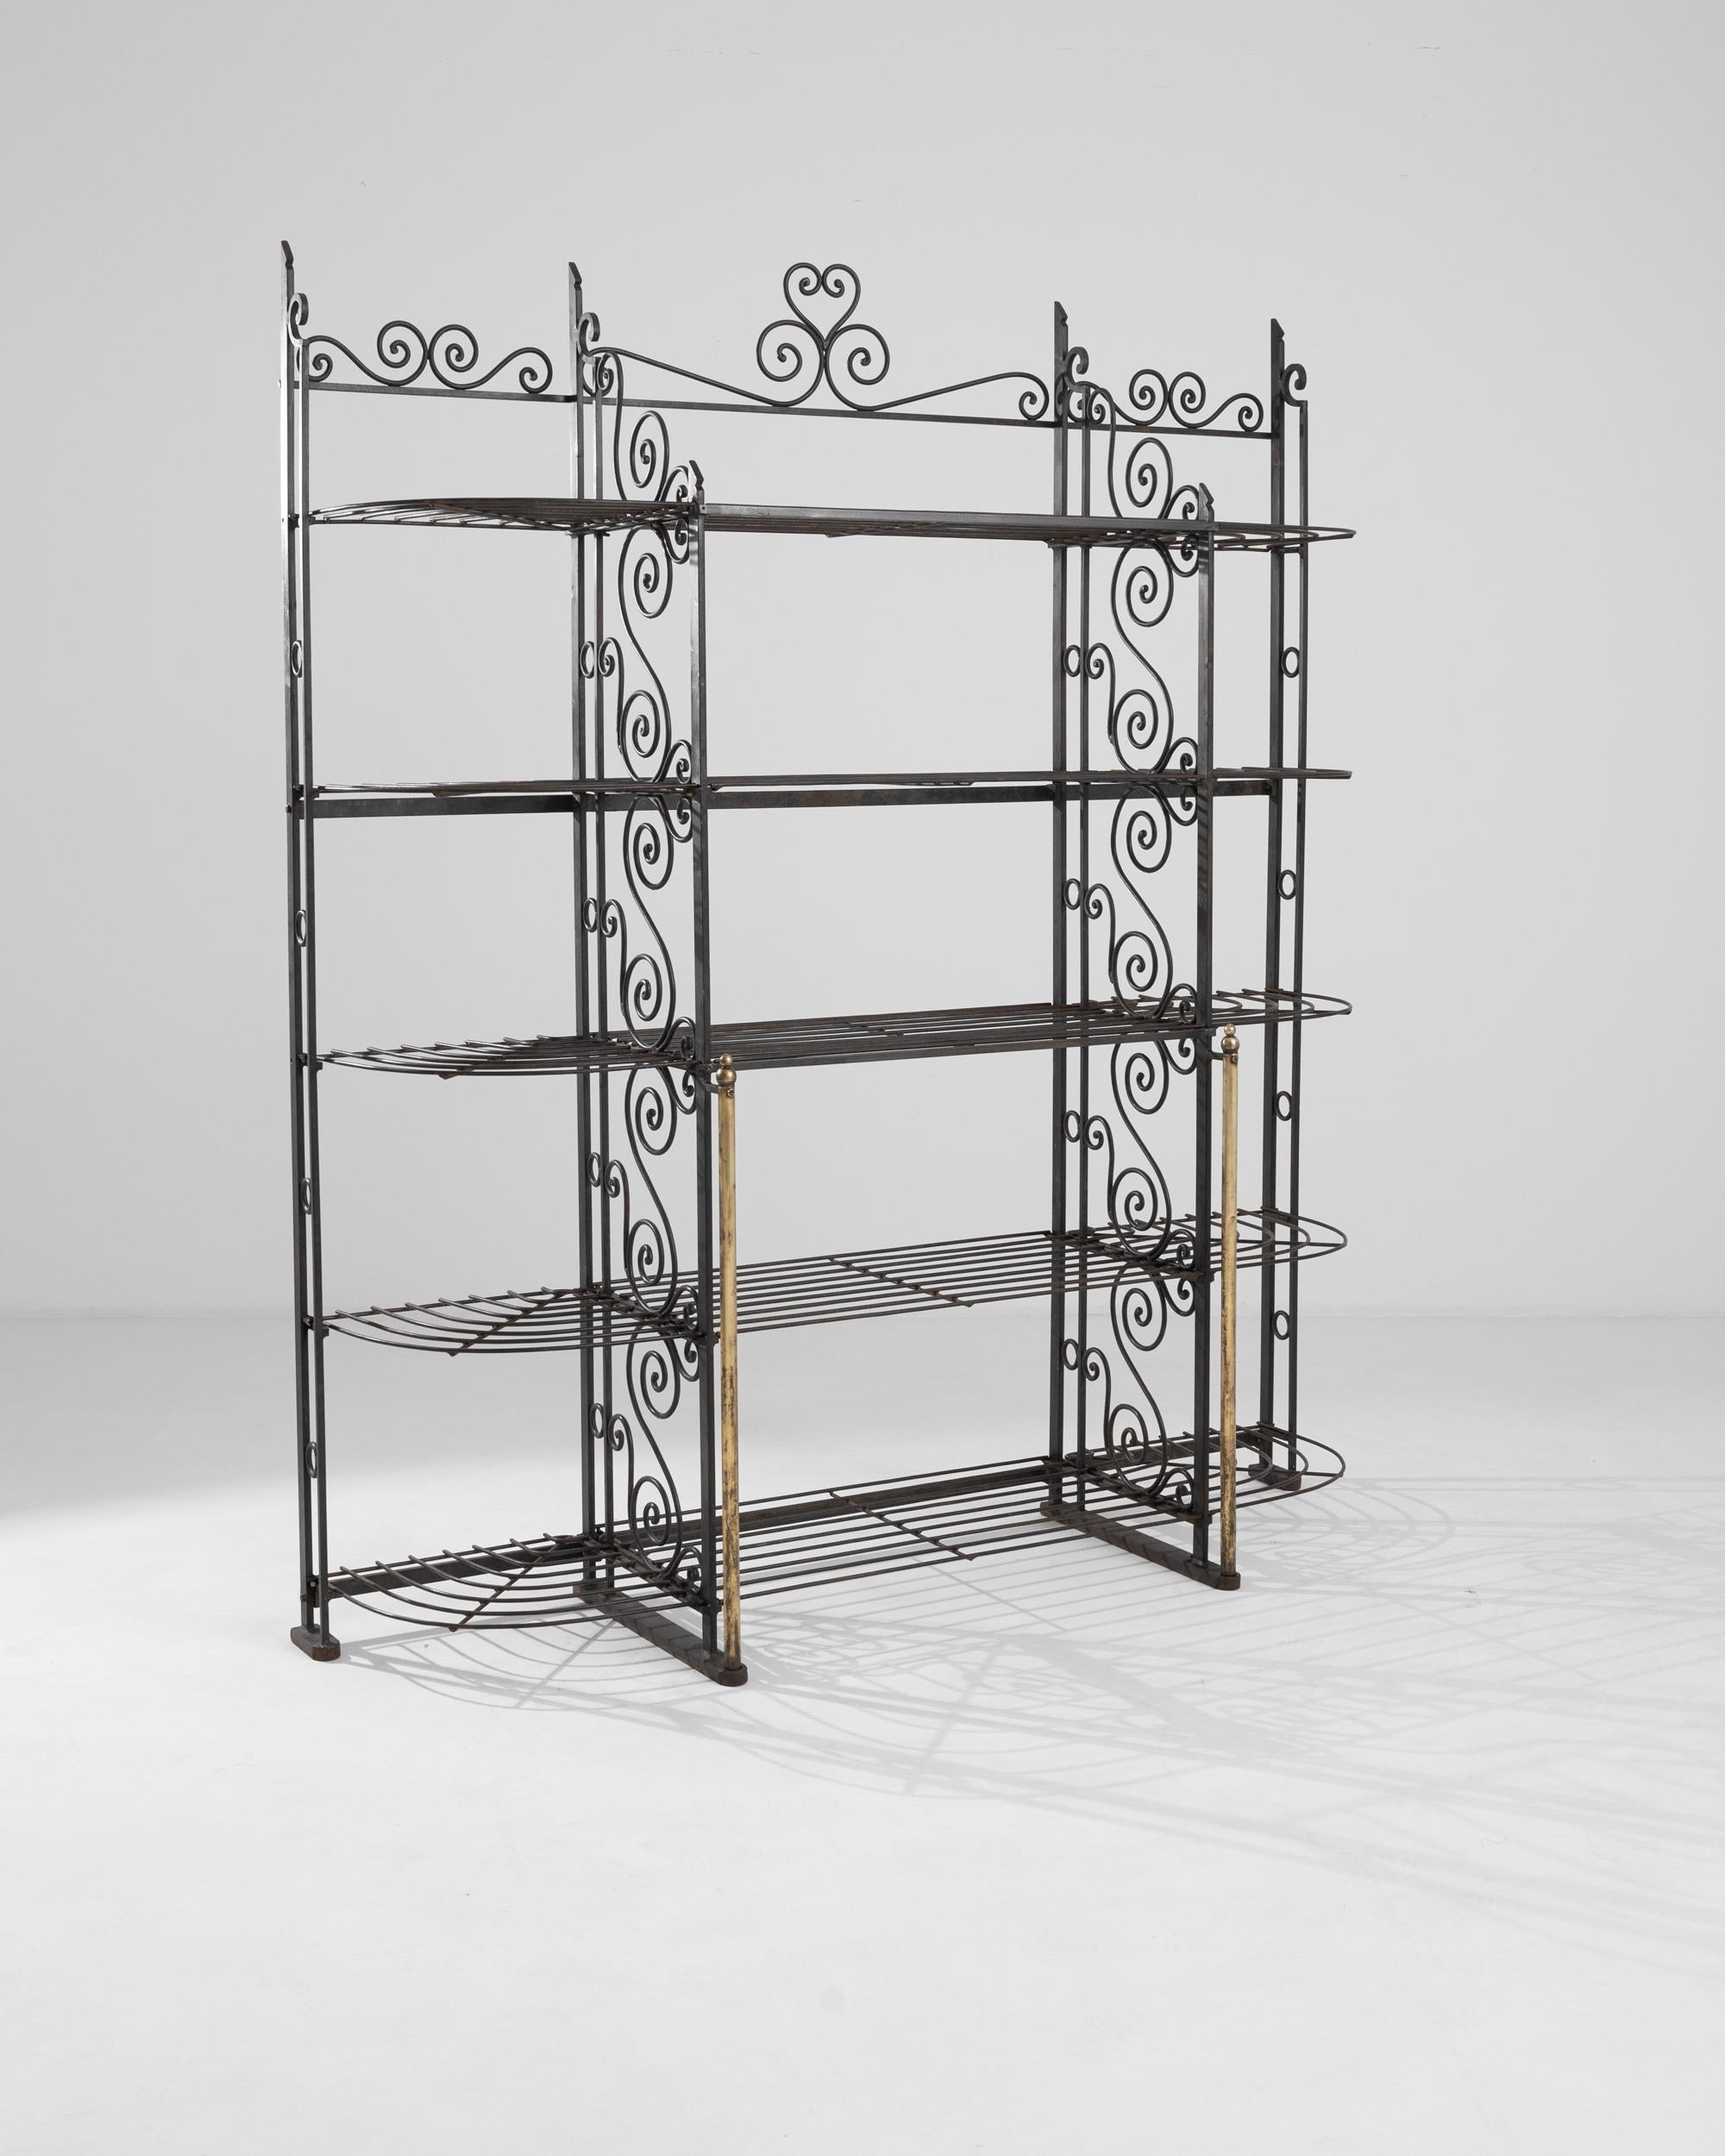 Light and ornate, this set of vintage iron shelves combines practicality with decorative charm. Made in France in the 20th century, the intricate pattern of scrolls which dance like vines across the shelf dividers and the top rail creates a